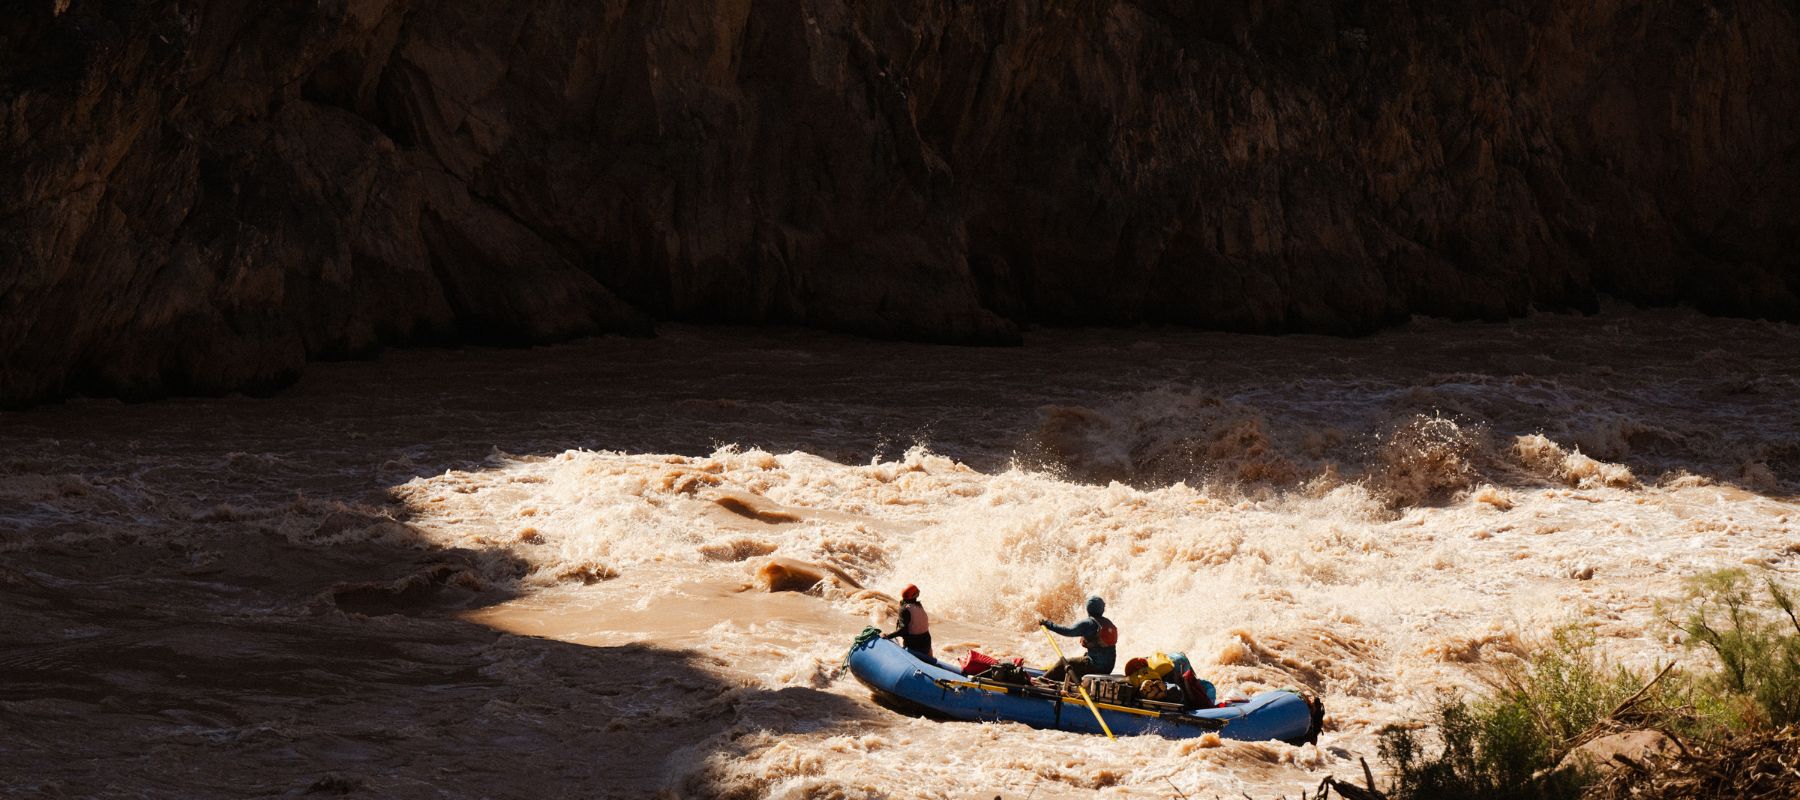 people rafting down the Colorado River in the Grand Canyon